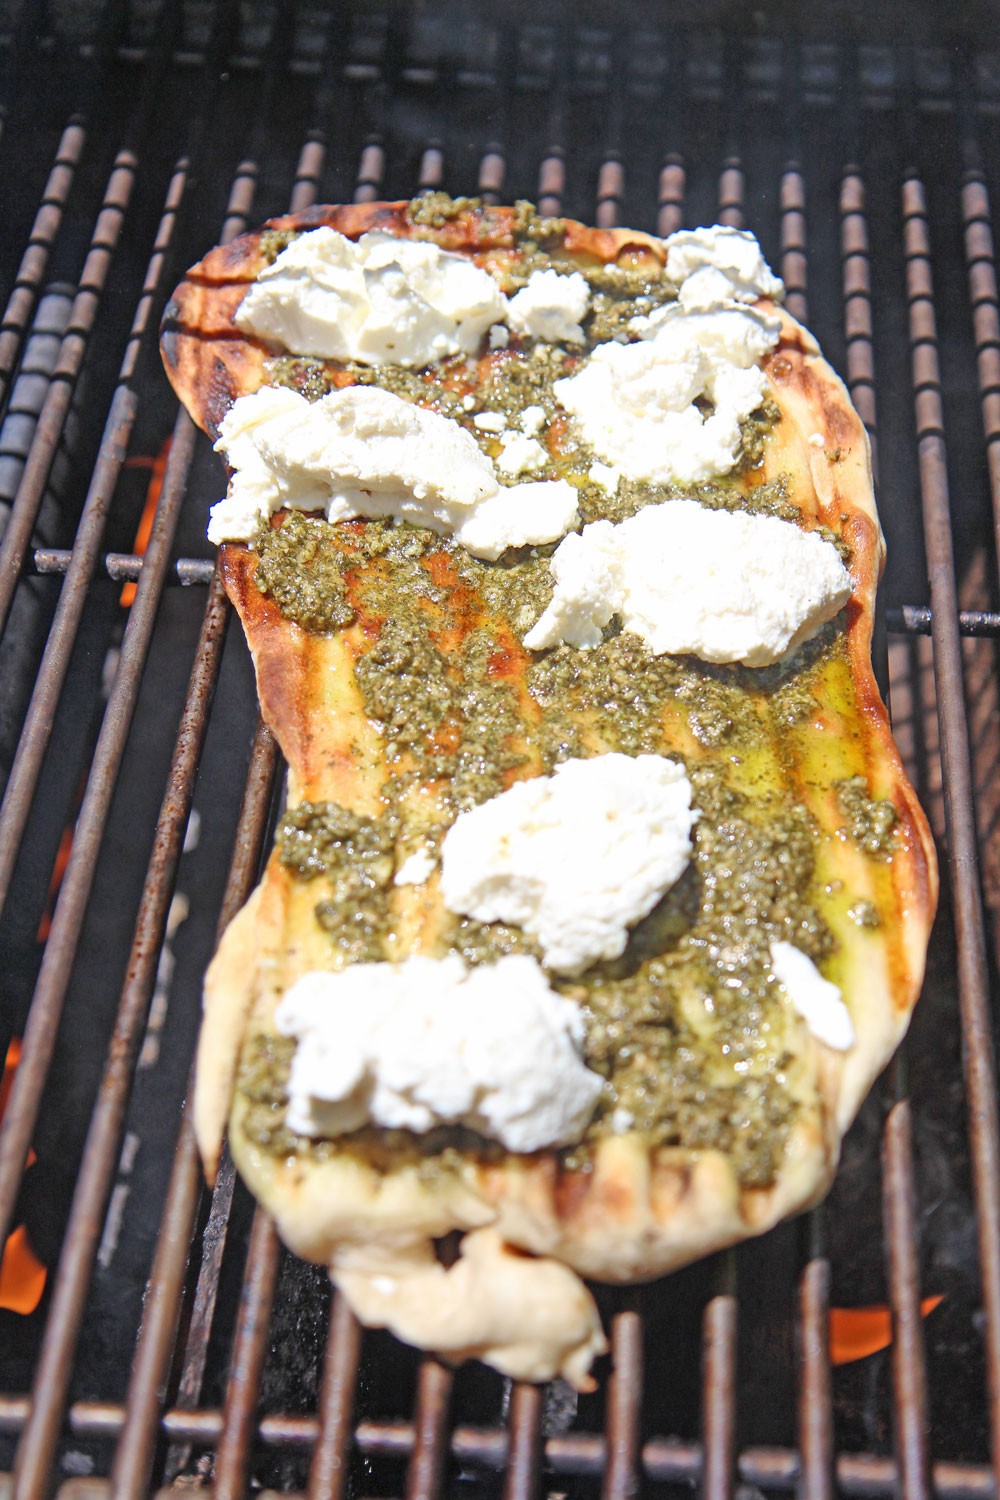 Easy Grilled Pesto Pizza Recipe. This is so easy to make. Grab pizza dough, pesto, riccota cheese, red pepper, and black pepper. You grill 2 minutes per side and dinner is ready. Happy grilling. www.ChopHappy.com #pizzarecipe #grillingrecipe